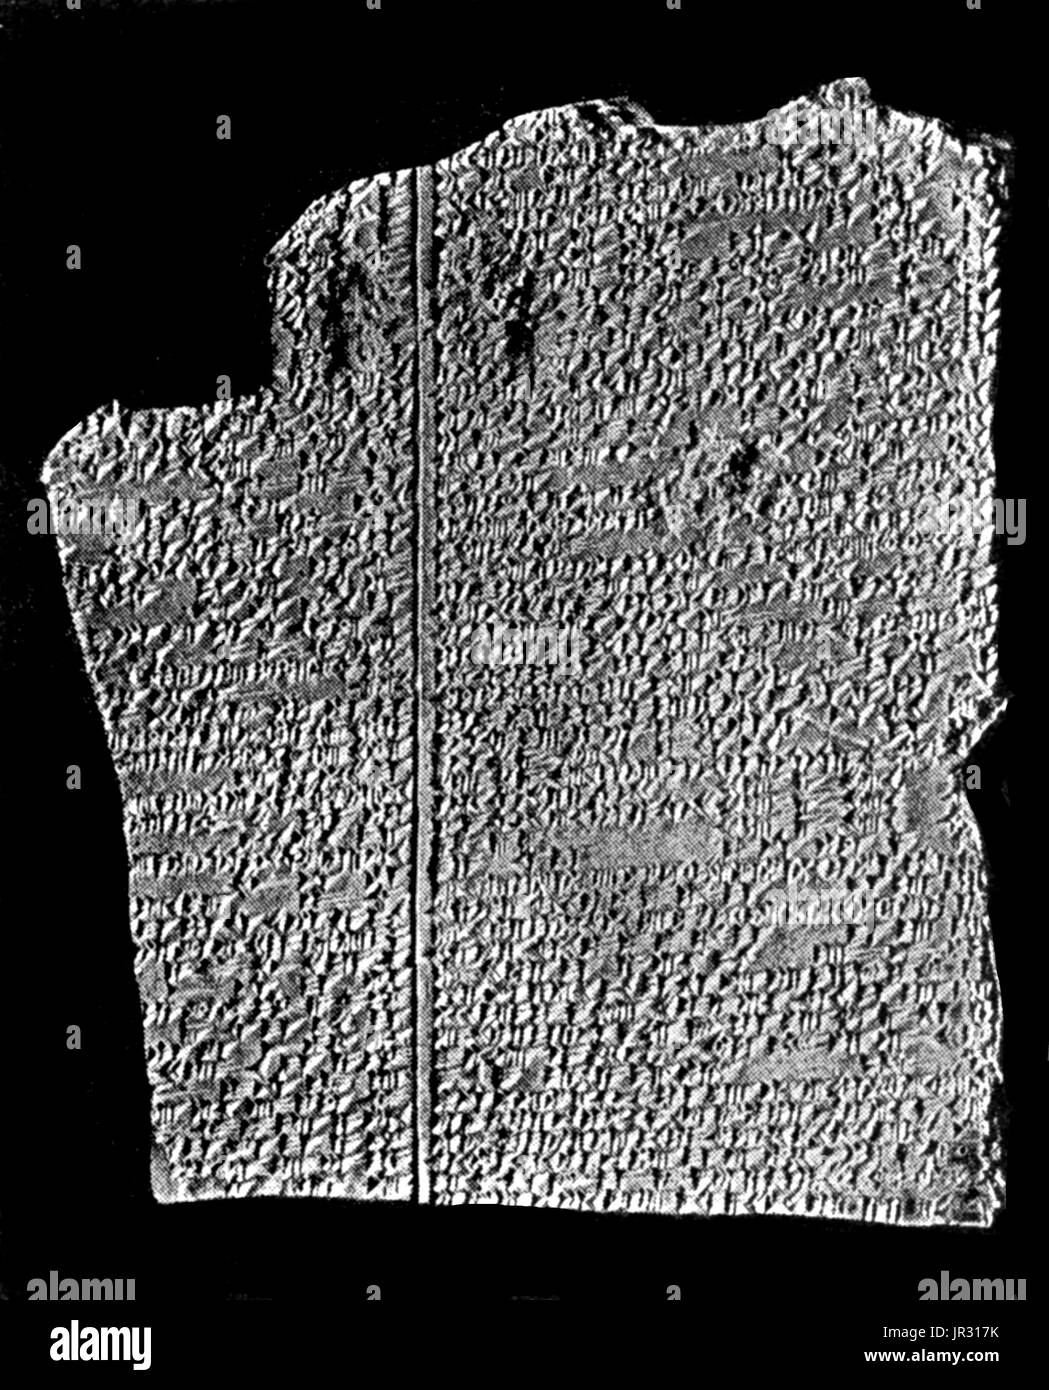 The Amarna tablets are an archive, written on clay tablets, primarily consisting of diplomatic correspondence between the Egyptian administration and its representatives in Canaan and Amurru during the New Kingdom. The Amarna letters are unusual in Egyptological research, because they are mostly written in Akkadian cuneiform, the writing system of ancient Mesopotamia, rather than that of ancient Egypt. The written correspondence spans a period of at most thirty years. The Amarna letters are of great significance for biblical studies as well as Semitic linguistics, since they shed light on the  Stock Photo